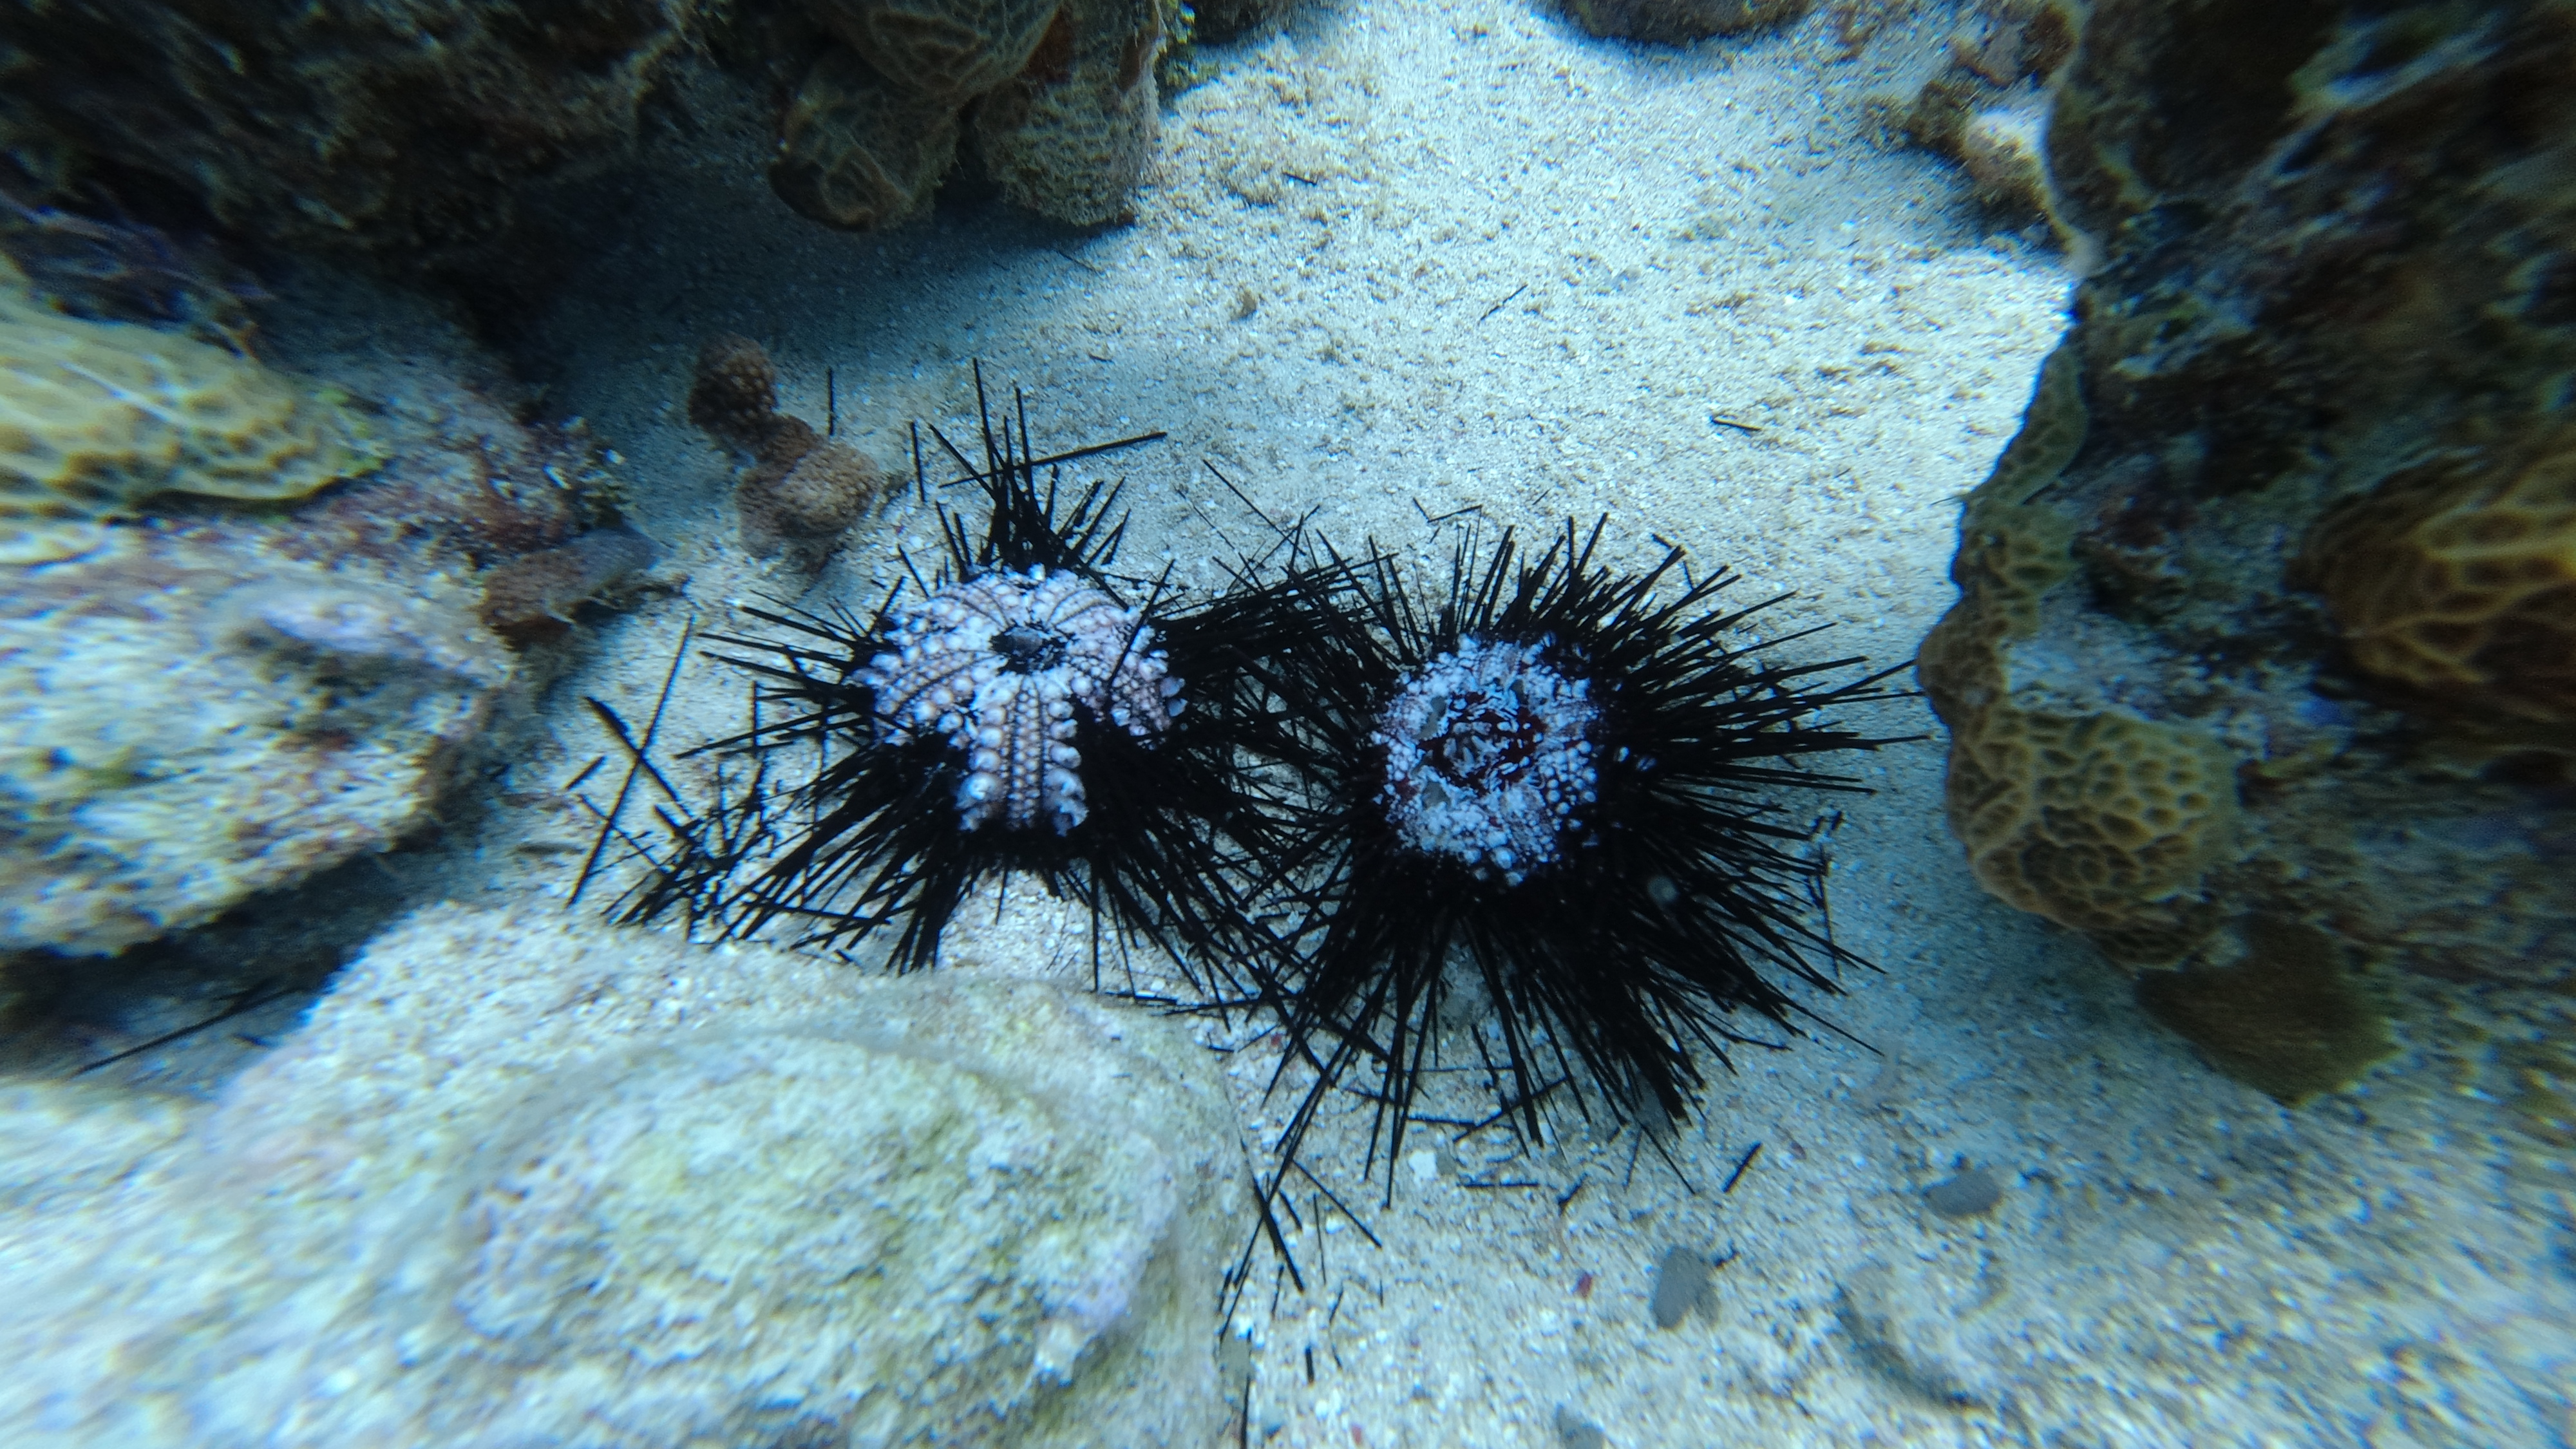 Sick, Dying/Dead Long-spined sea urchins Credit: C. May, MBMPT